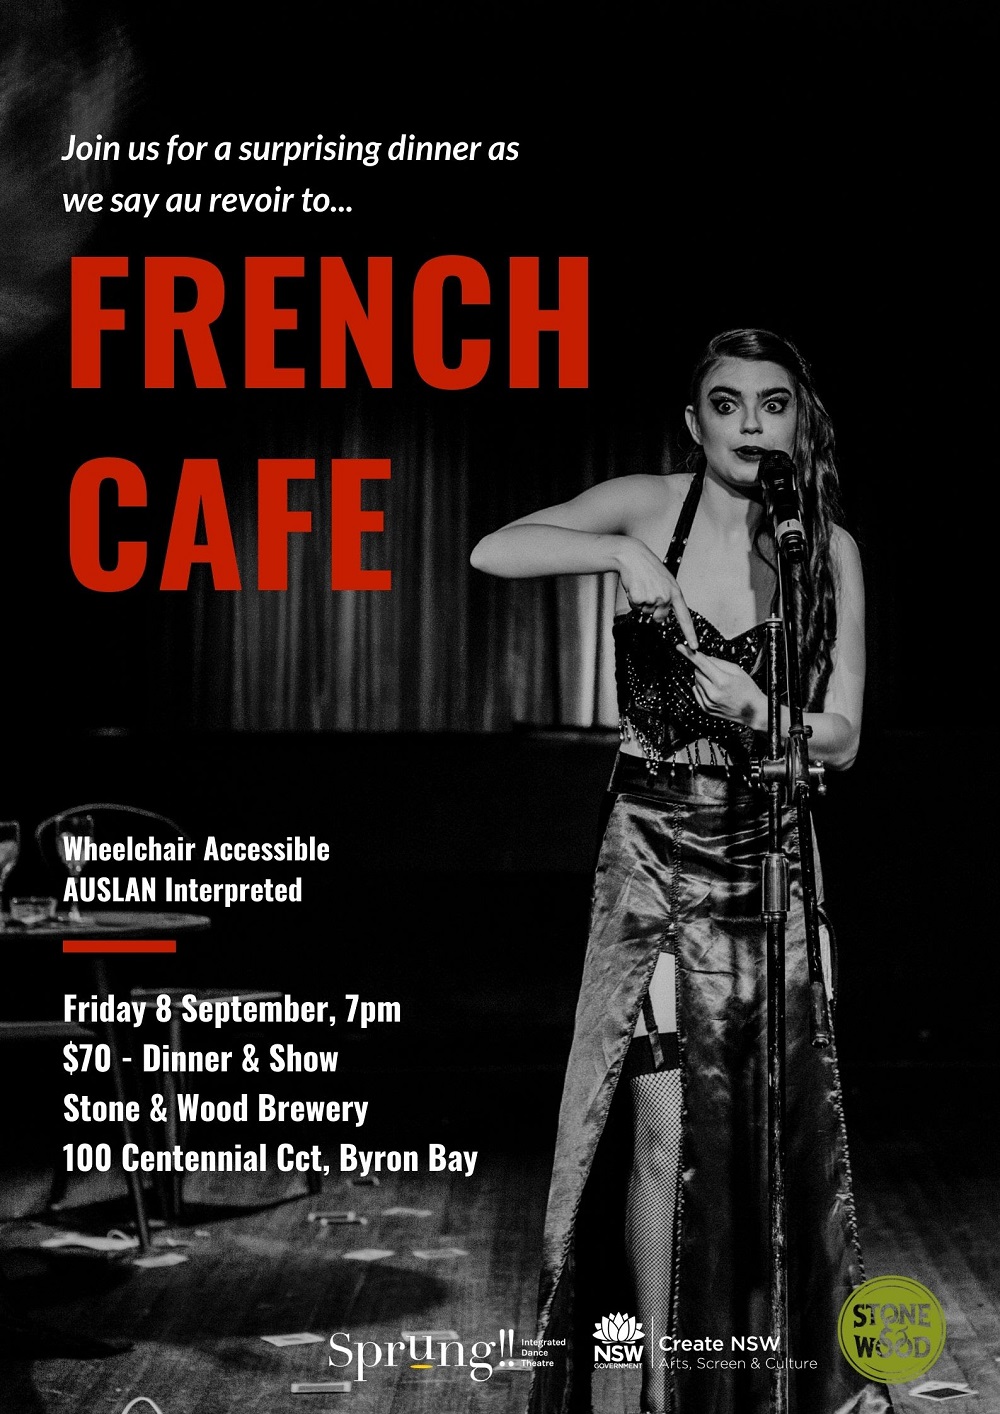 Sprung!! French Cafe Dinner tickets on sale